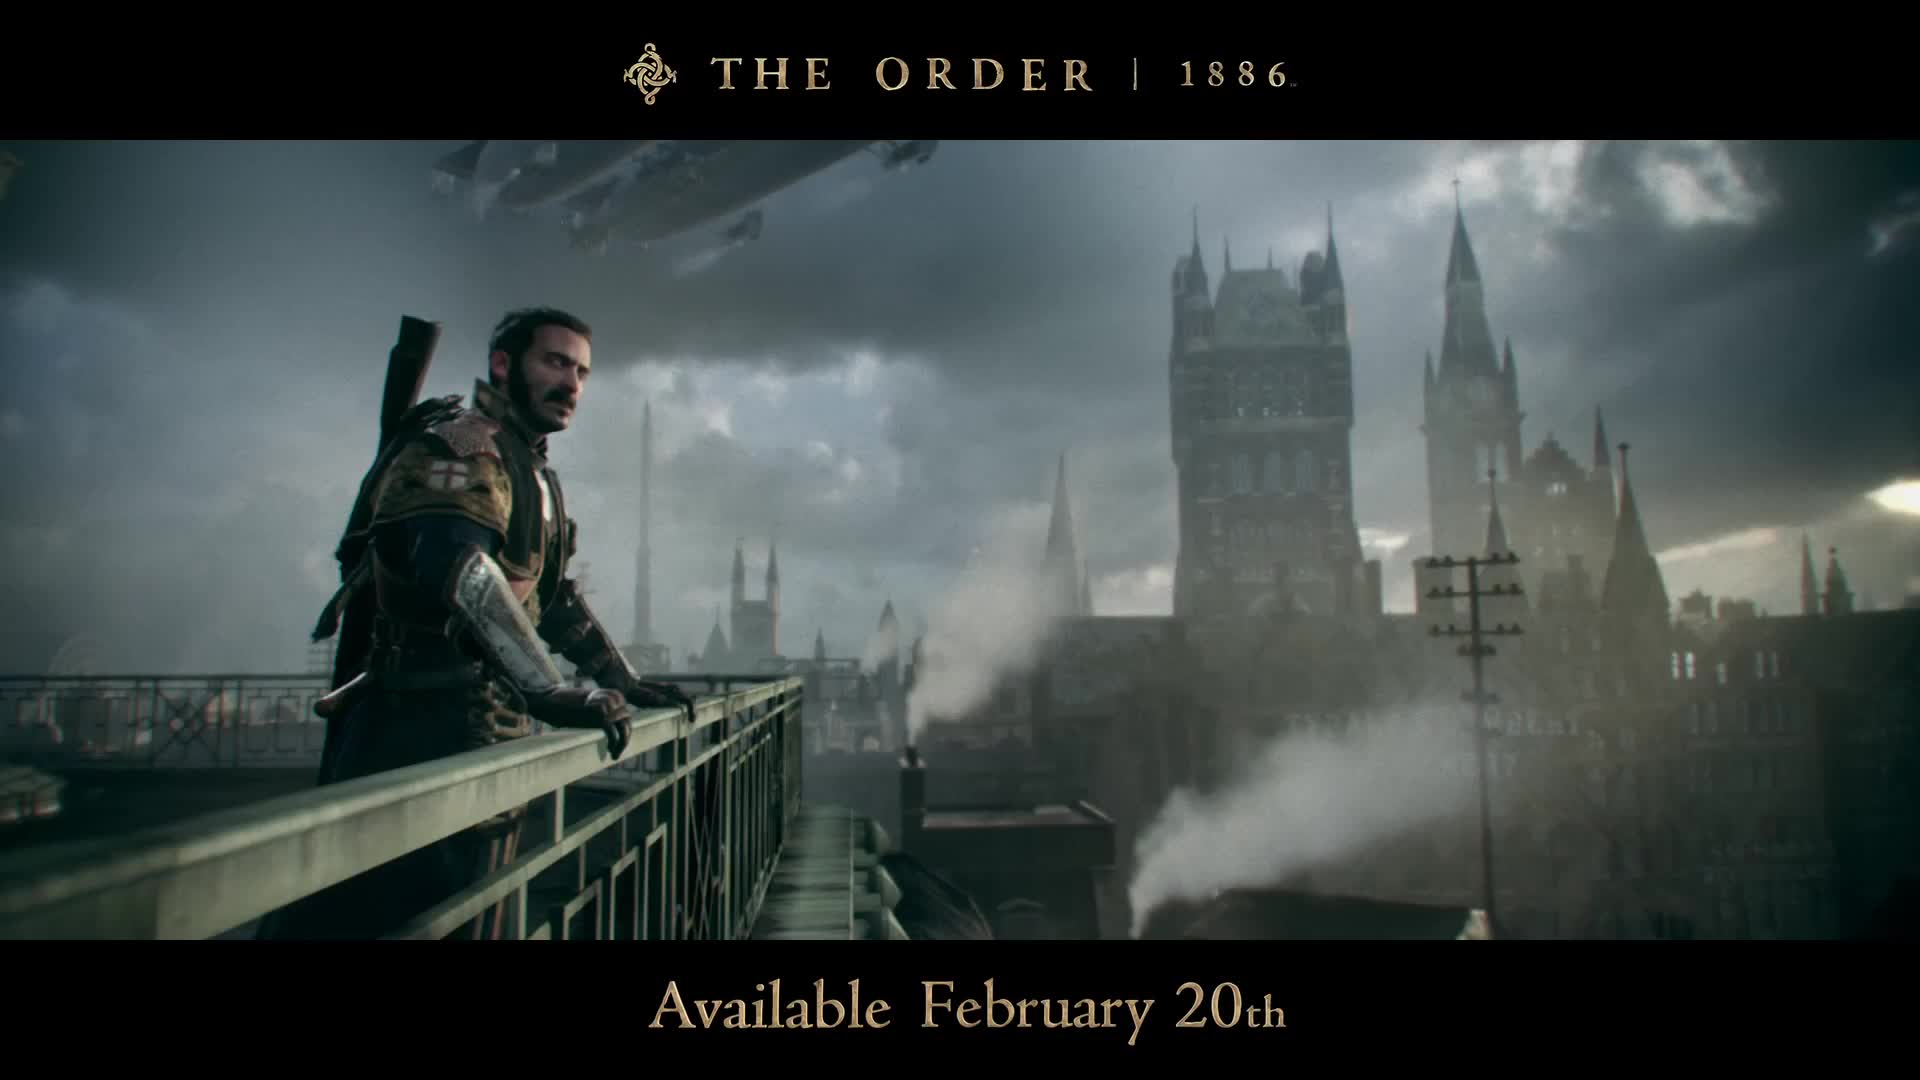 The Order: 1886 - Story Trailer